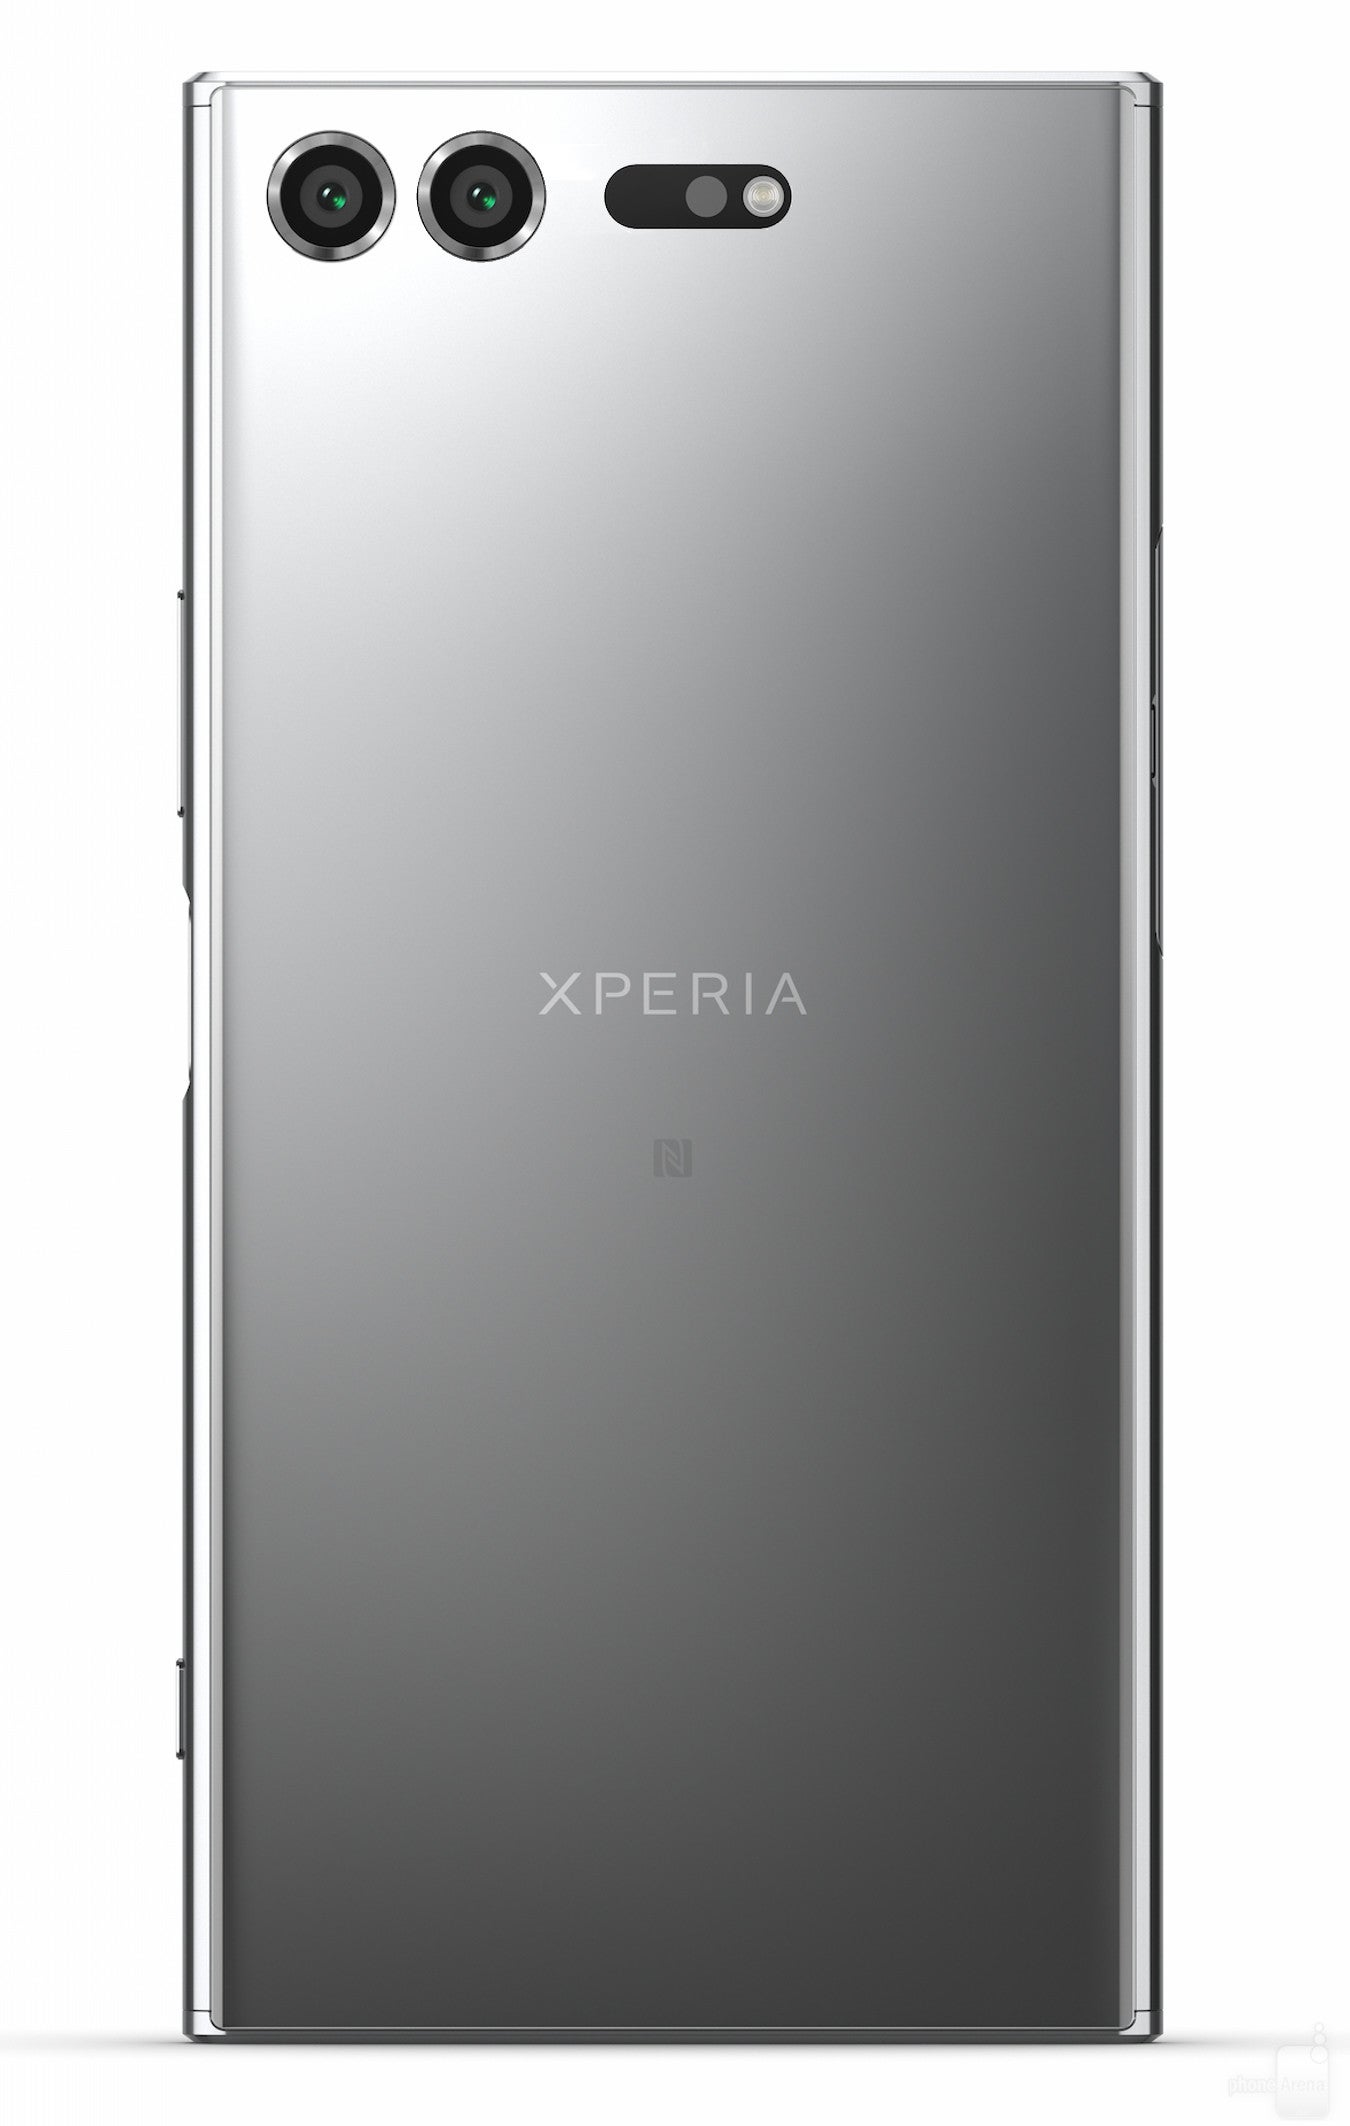 Is Sony's first dual-camera phone right around the corner? - Sony Xperia XZ Pro rumor review: Design, specs, features, price and release date